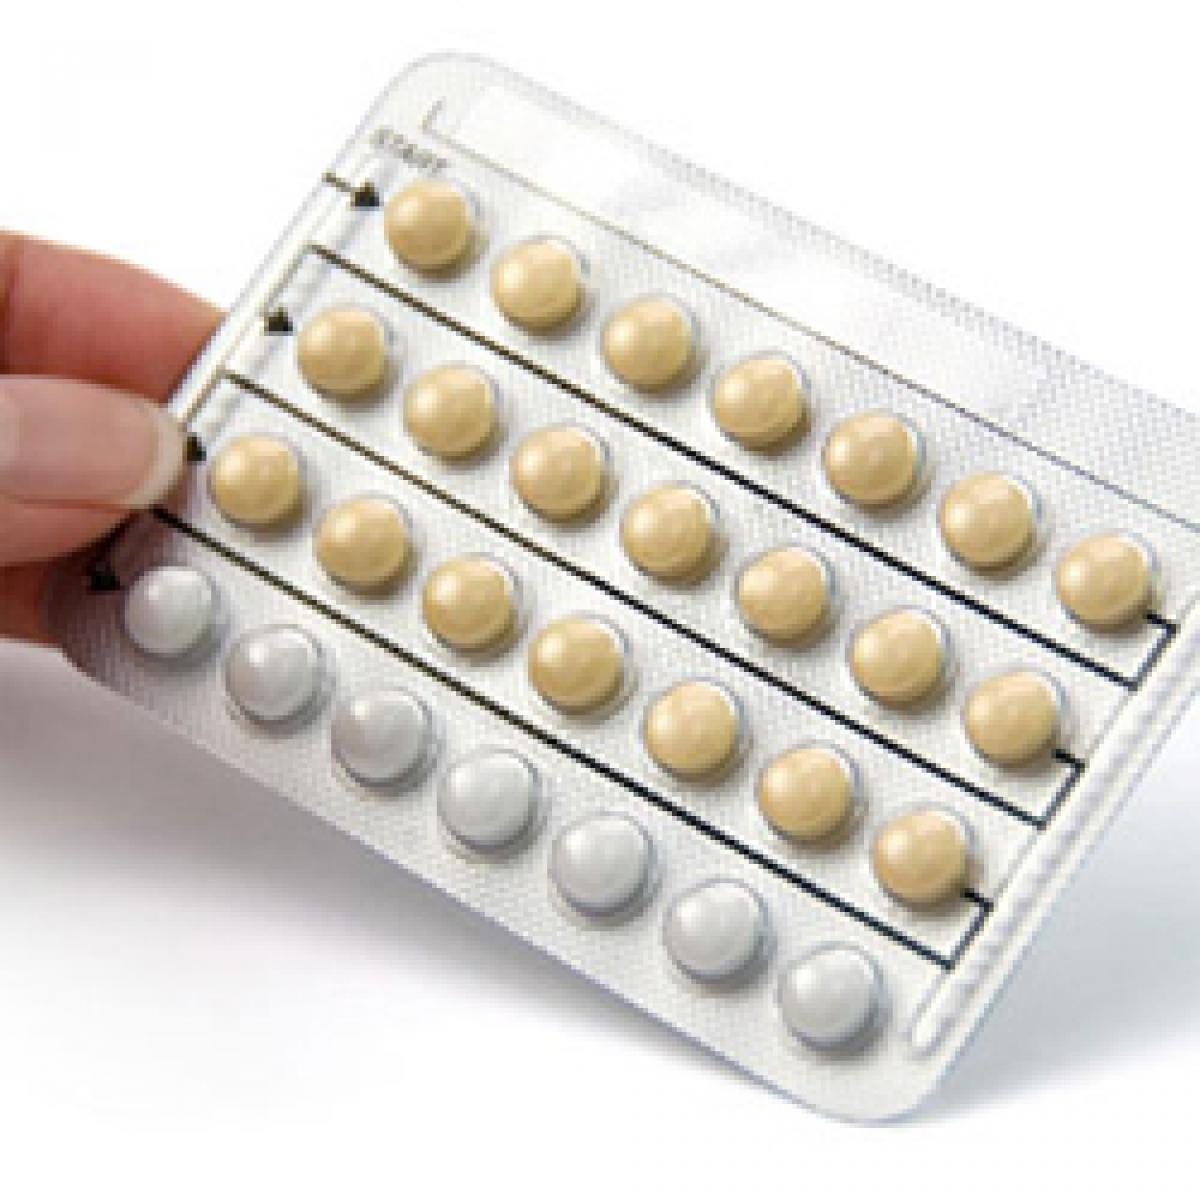 Parenting behaviour influenced by chemicals in birth control pills